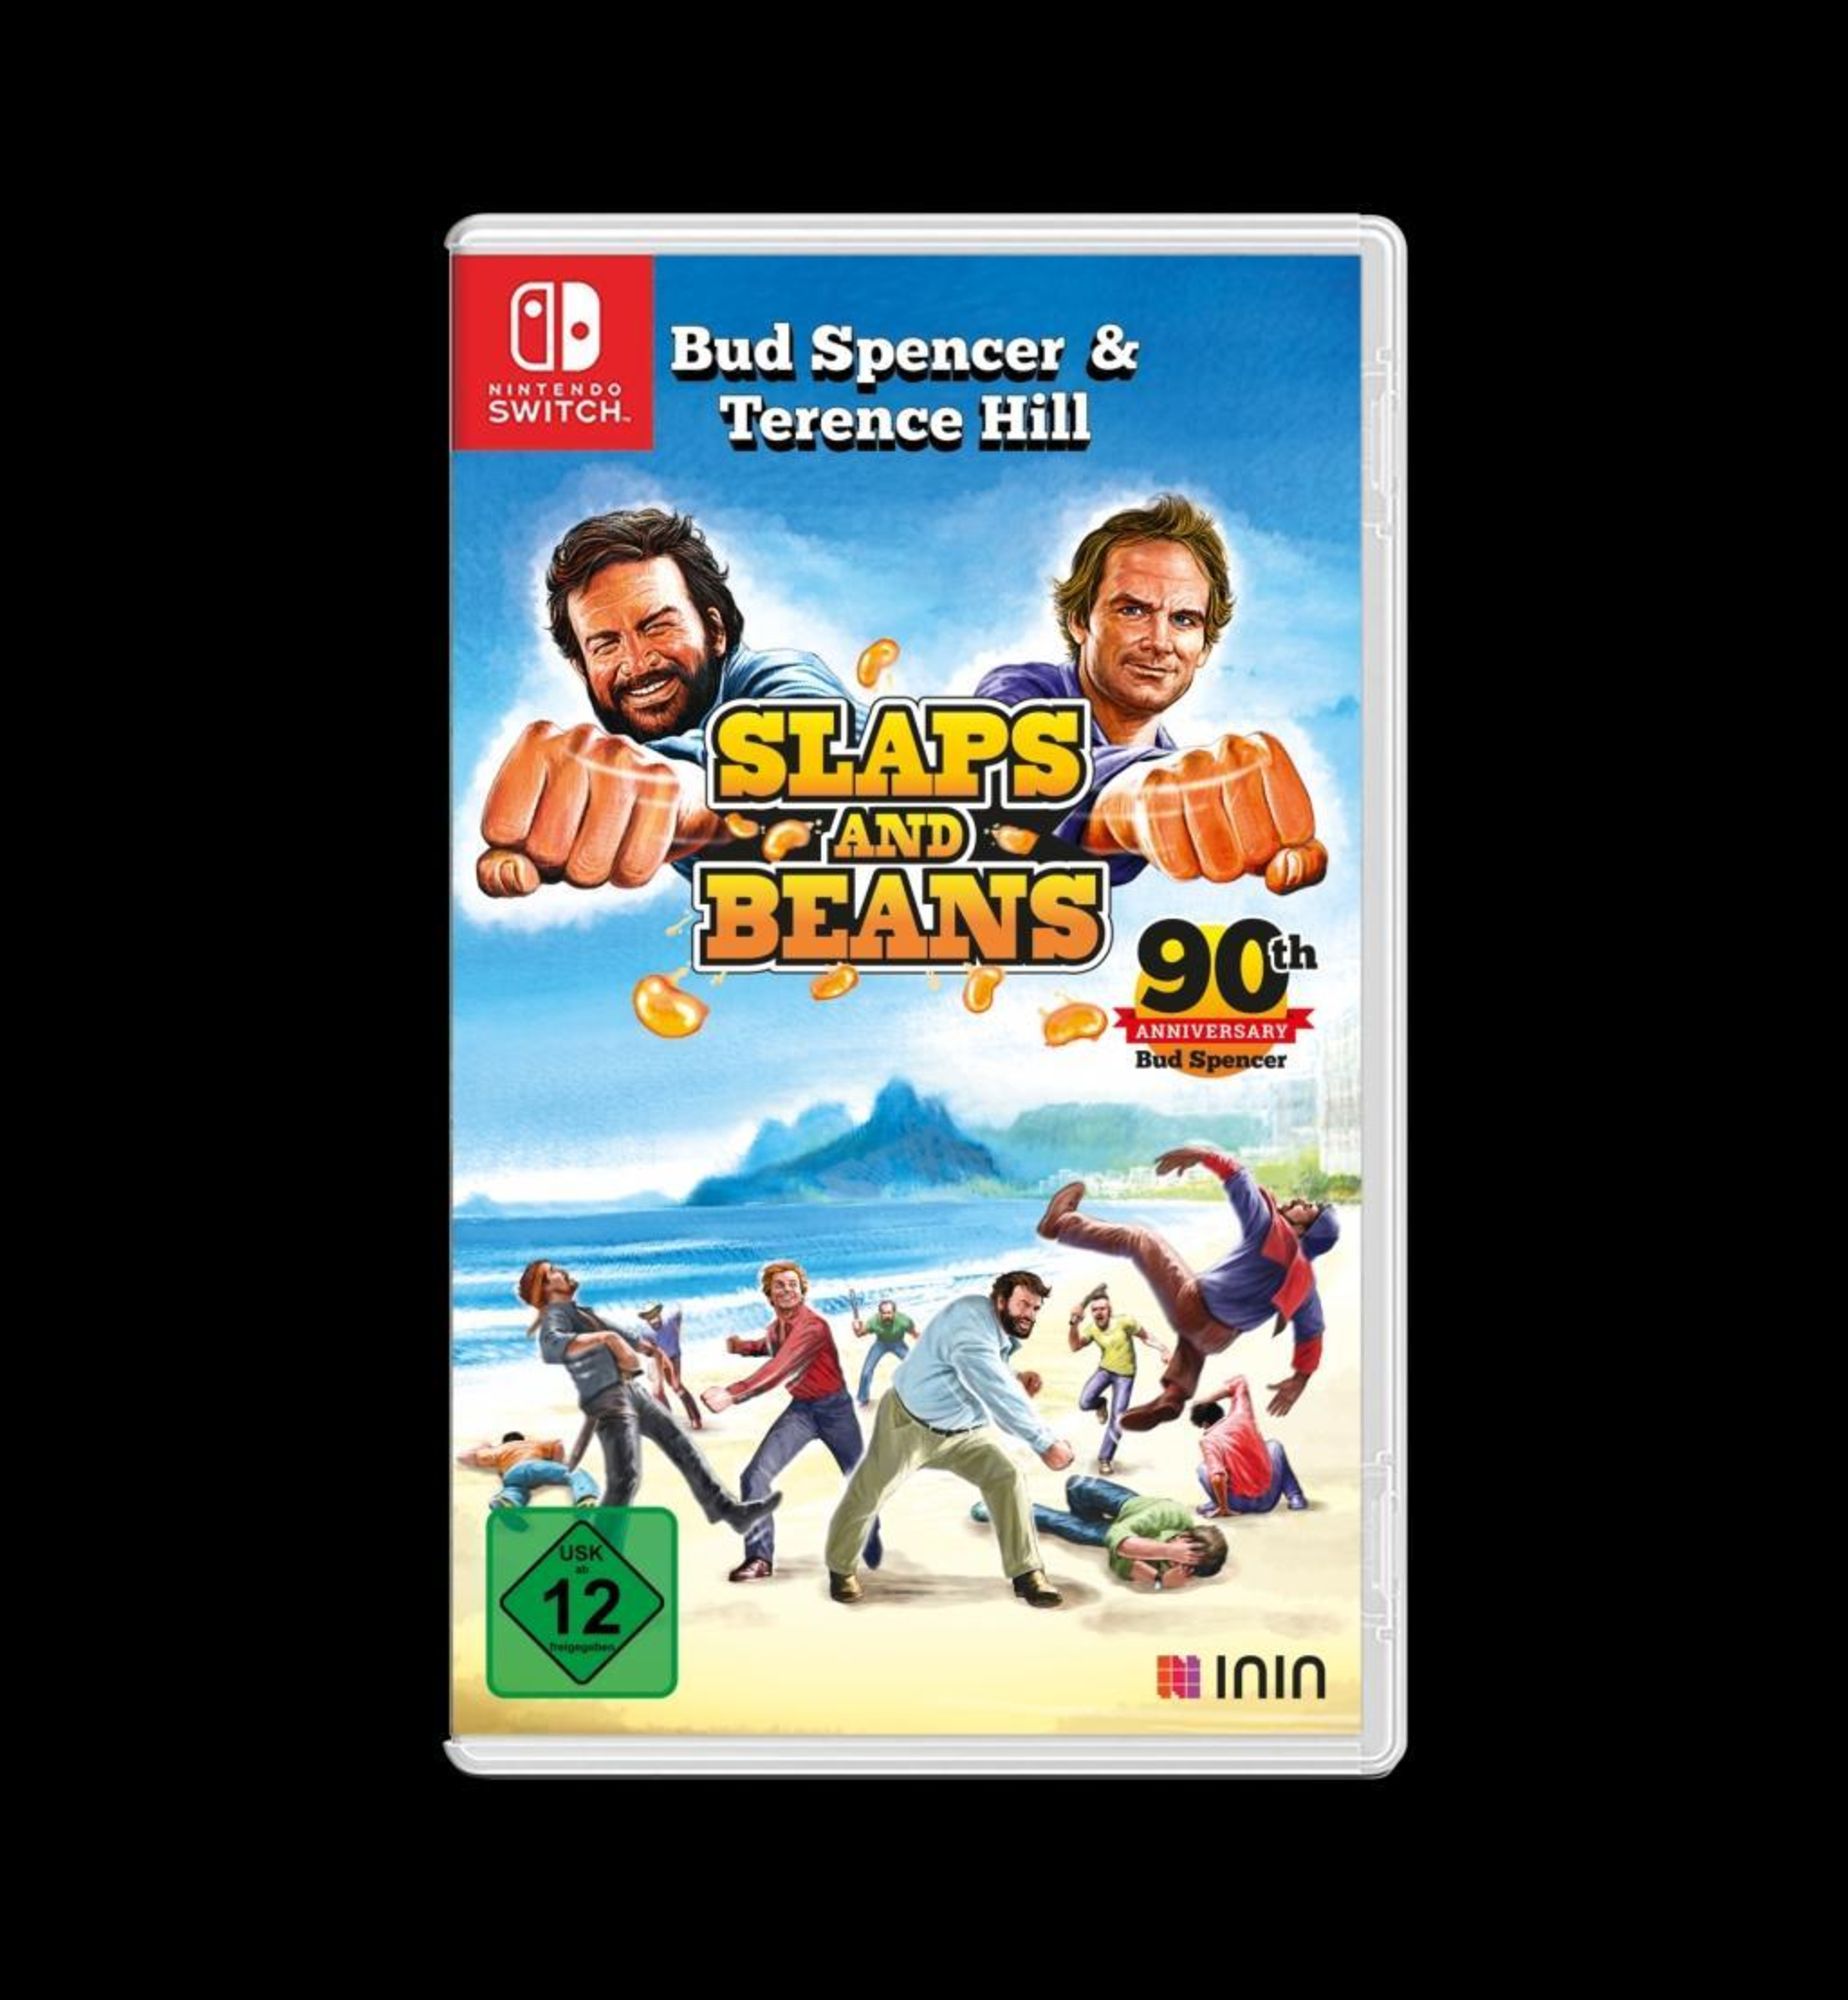 Bud Spencer & Terence Hill - Slaps and Beans' für 'Nintendo Switch' kaufen